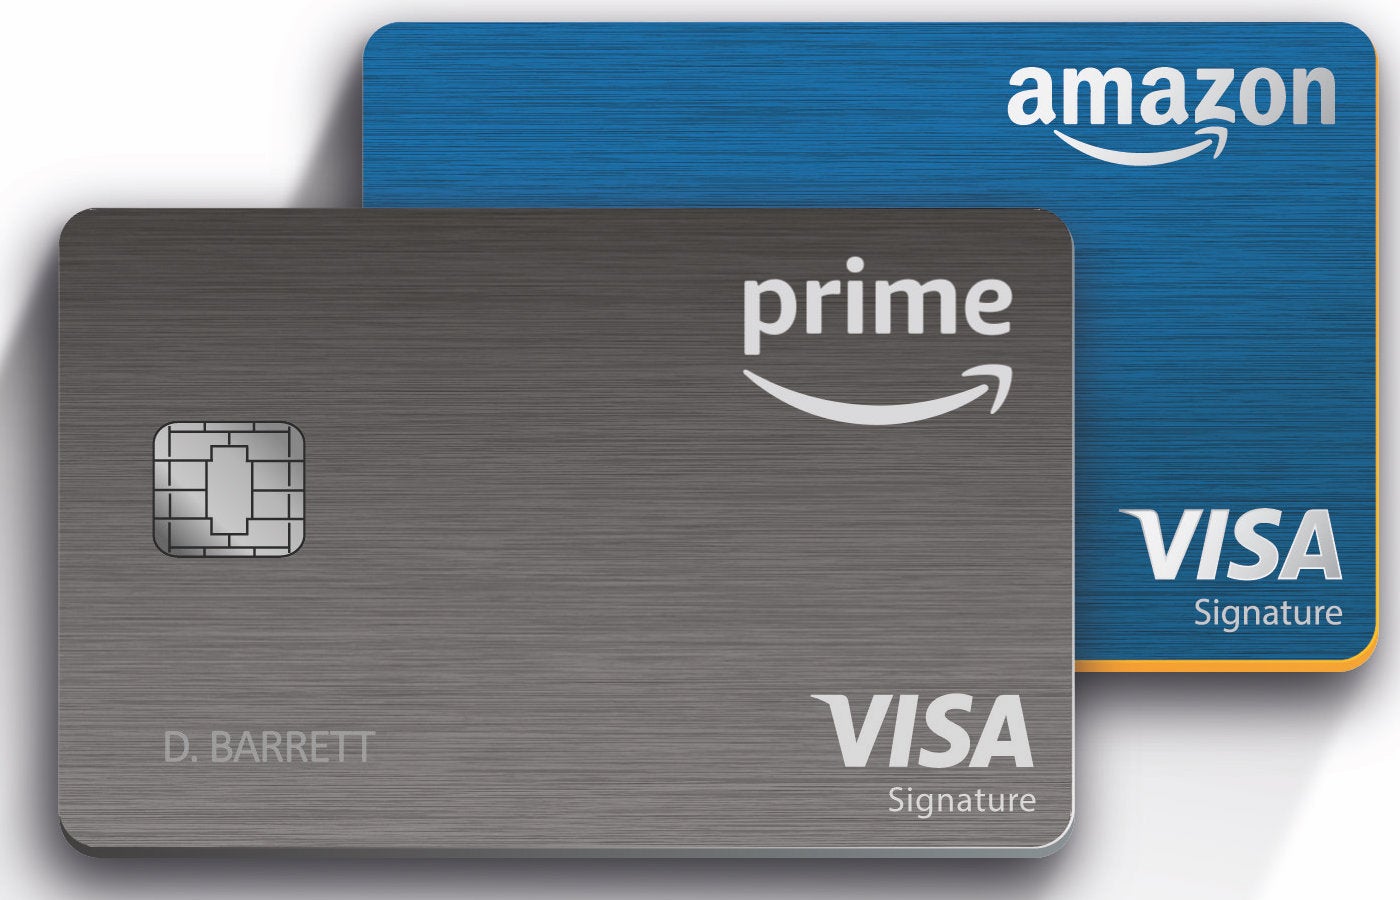 Amazon And Chase Will Not Give Me A Straight Answer About What They Do With My Credit Card Data ...